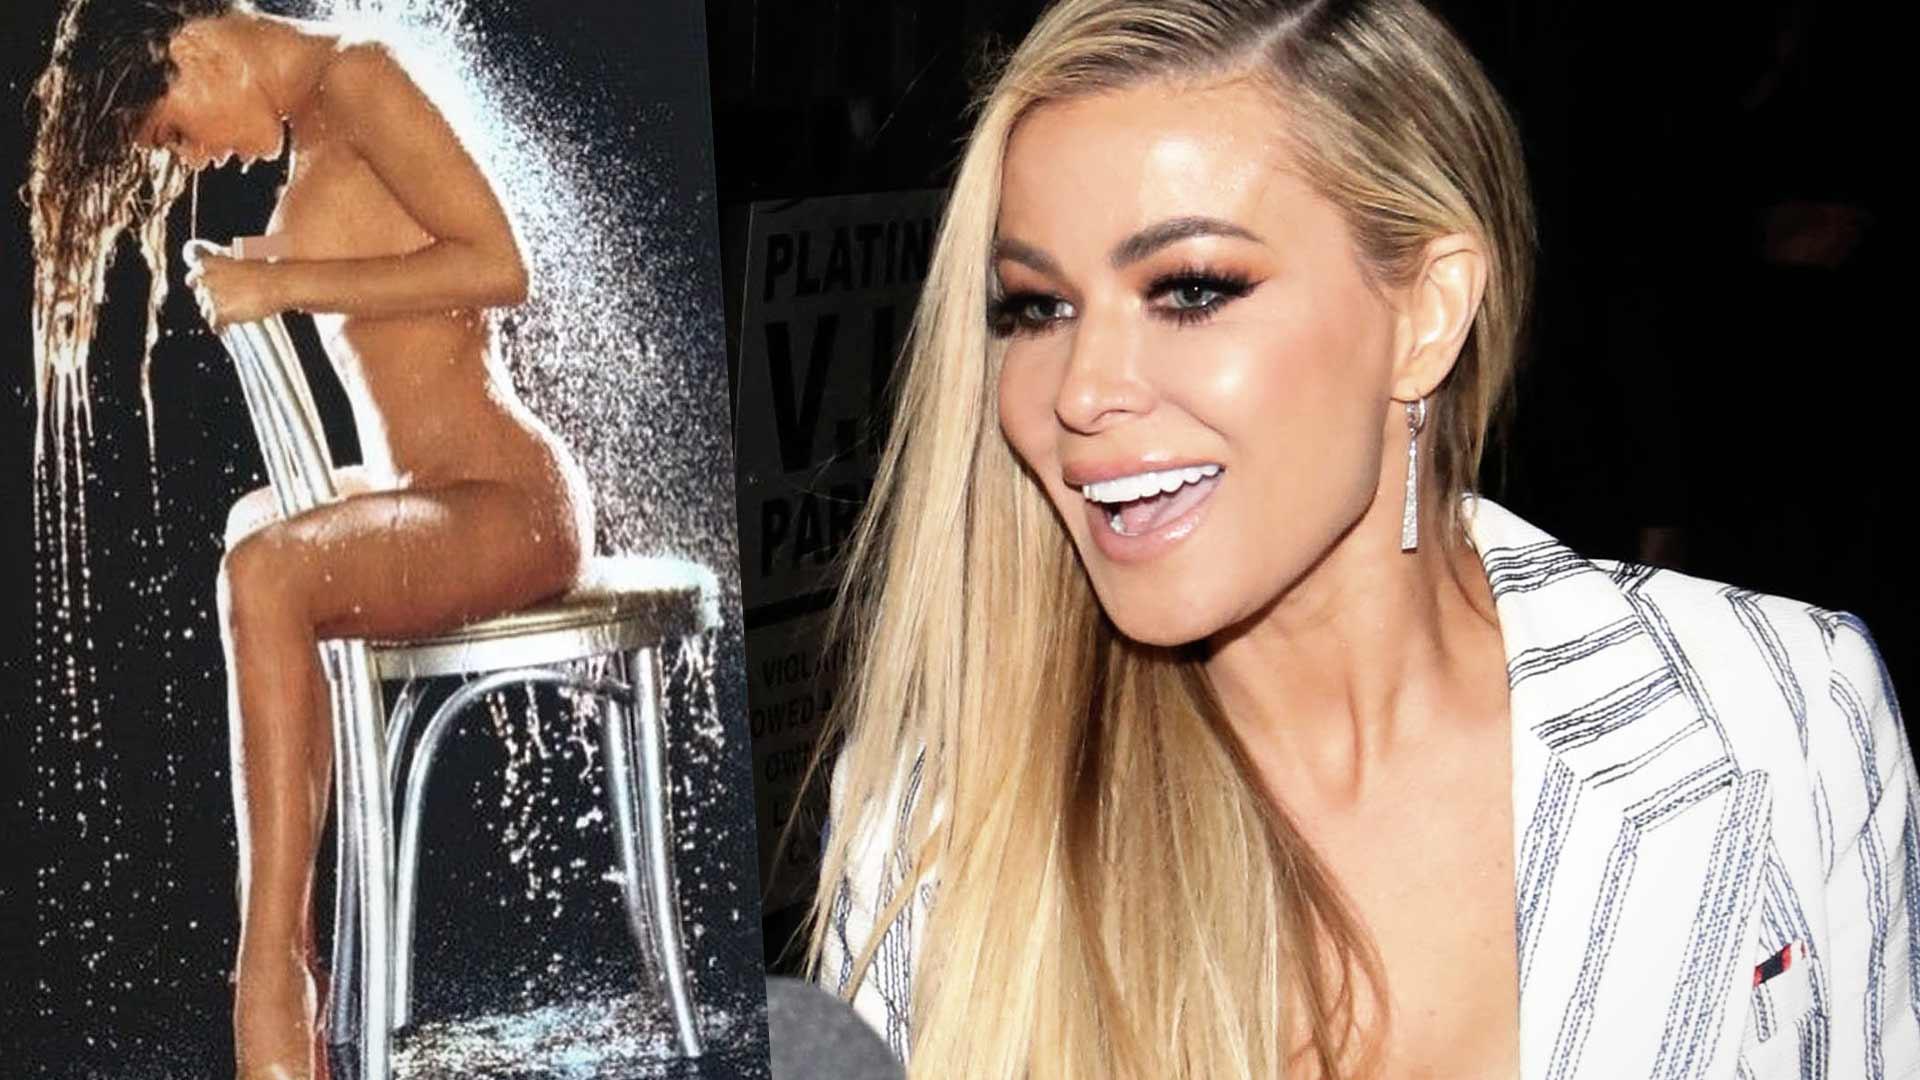 Carmen Electra Gets the Weekend Going By ‘Cooling Off’ With Naked Playboy Throwback